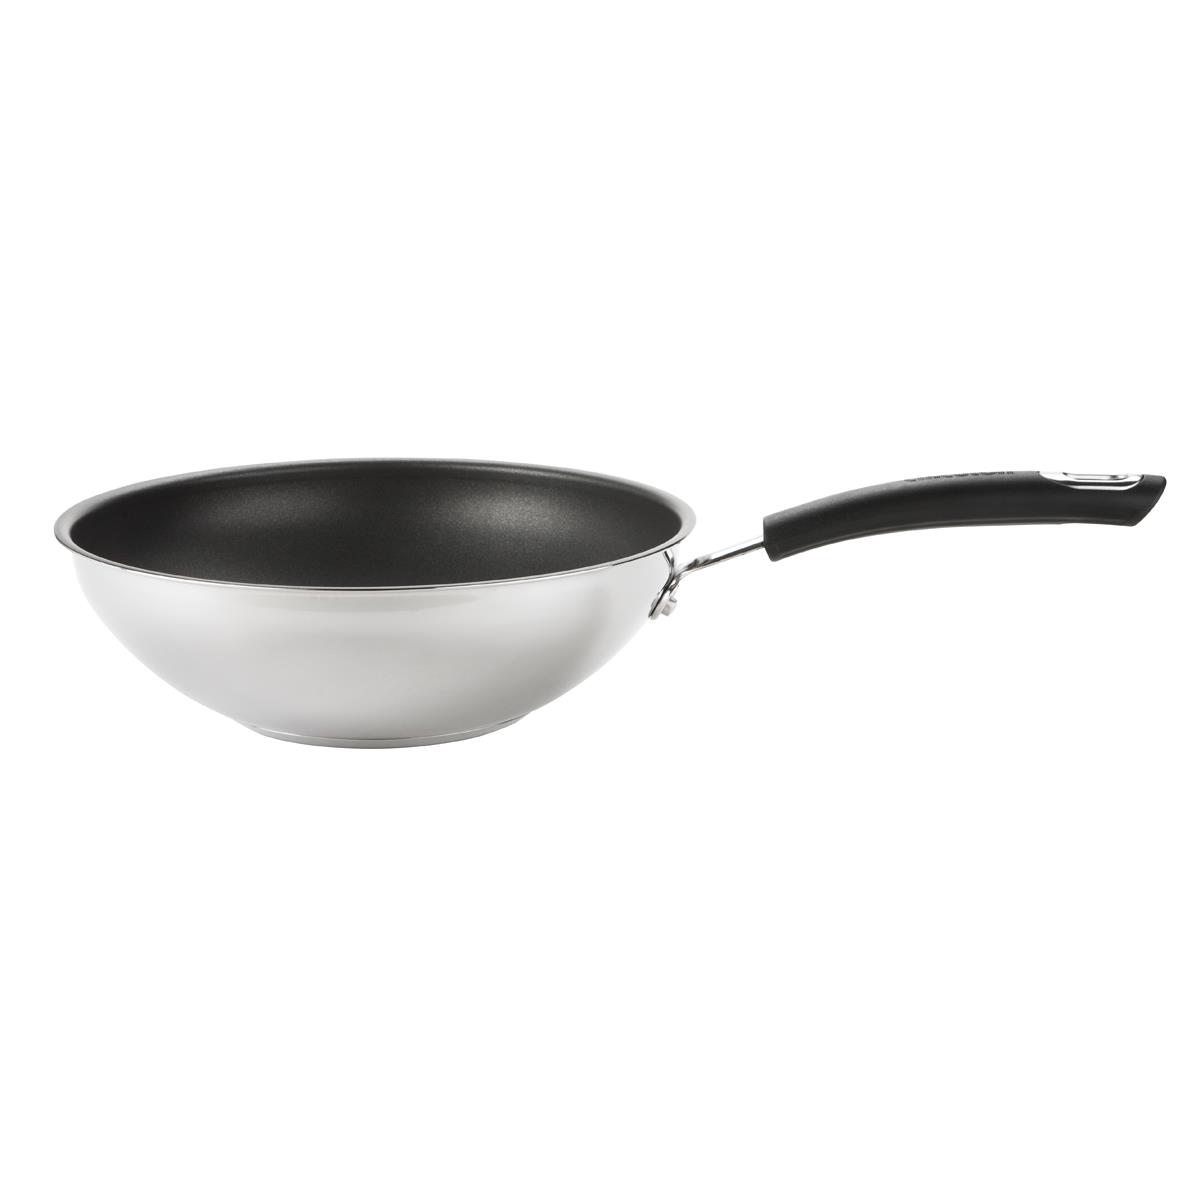 Can you stir fry in stainless steel Circulon saucepans?